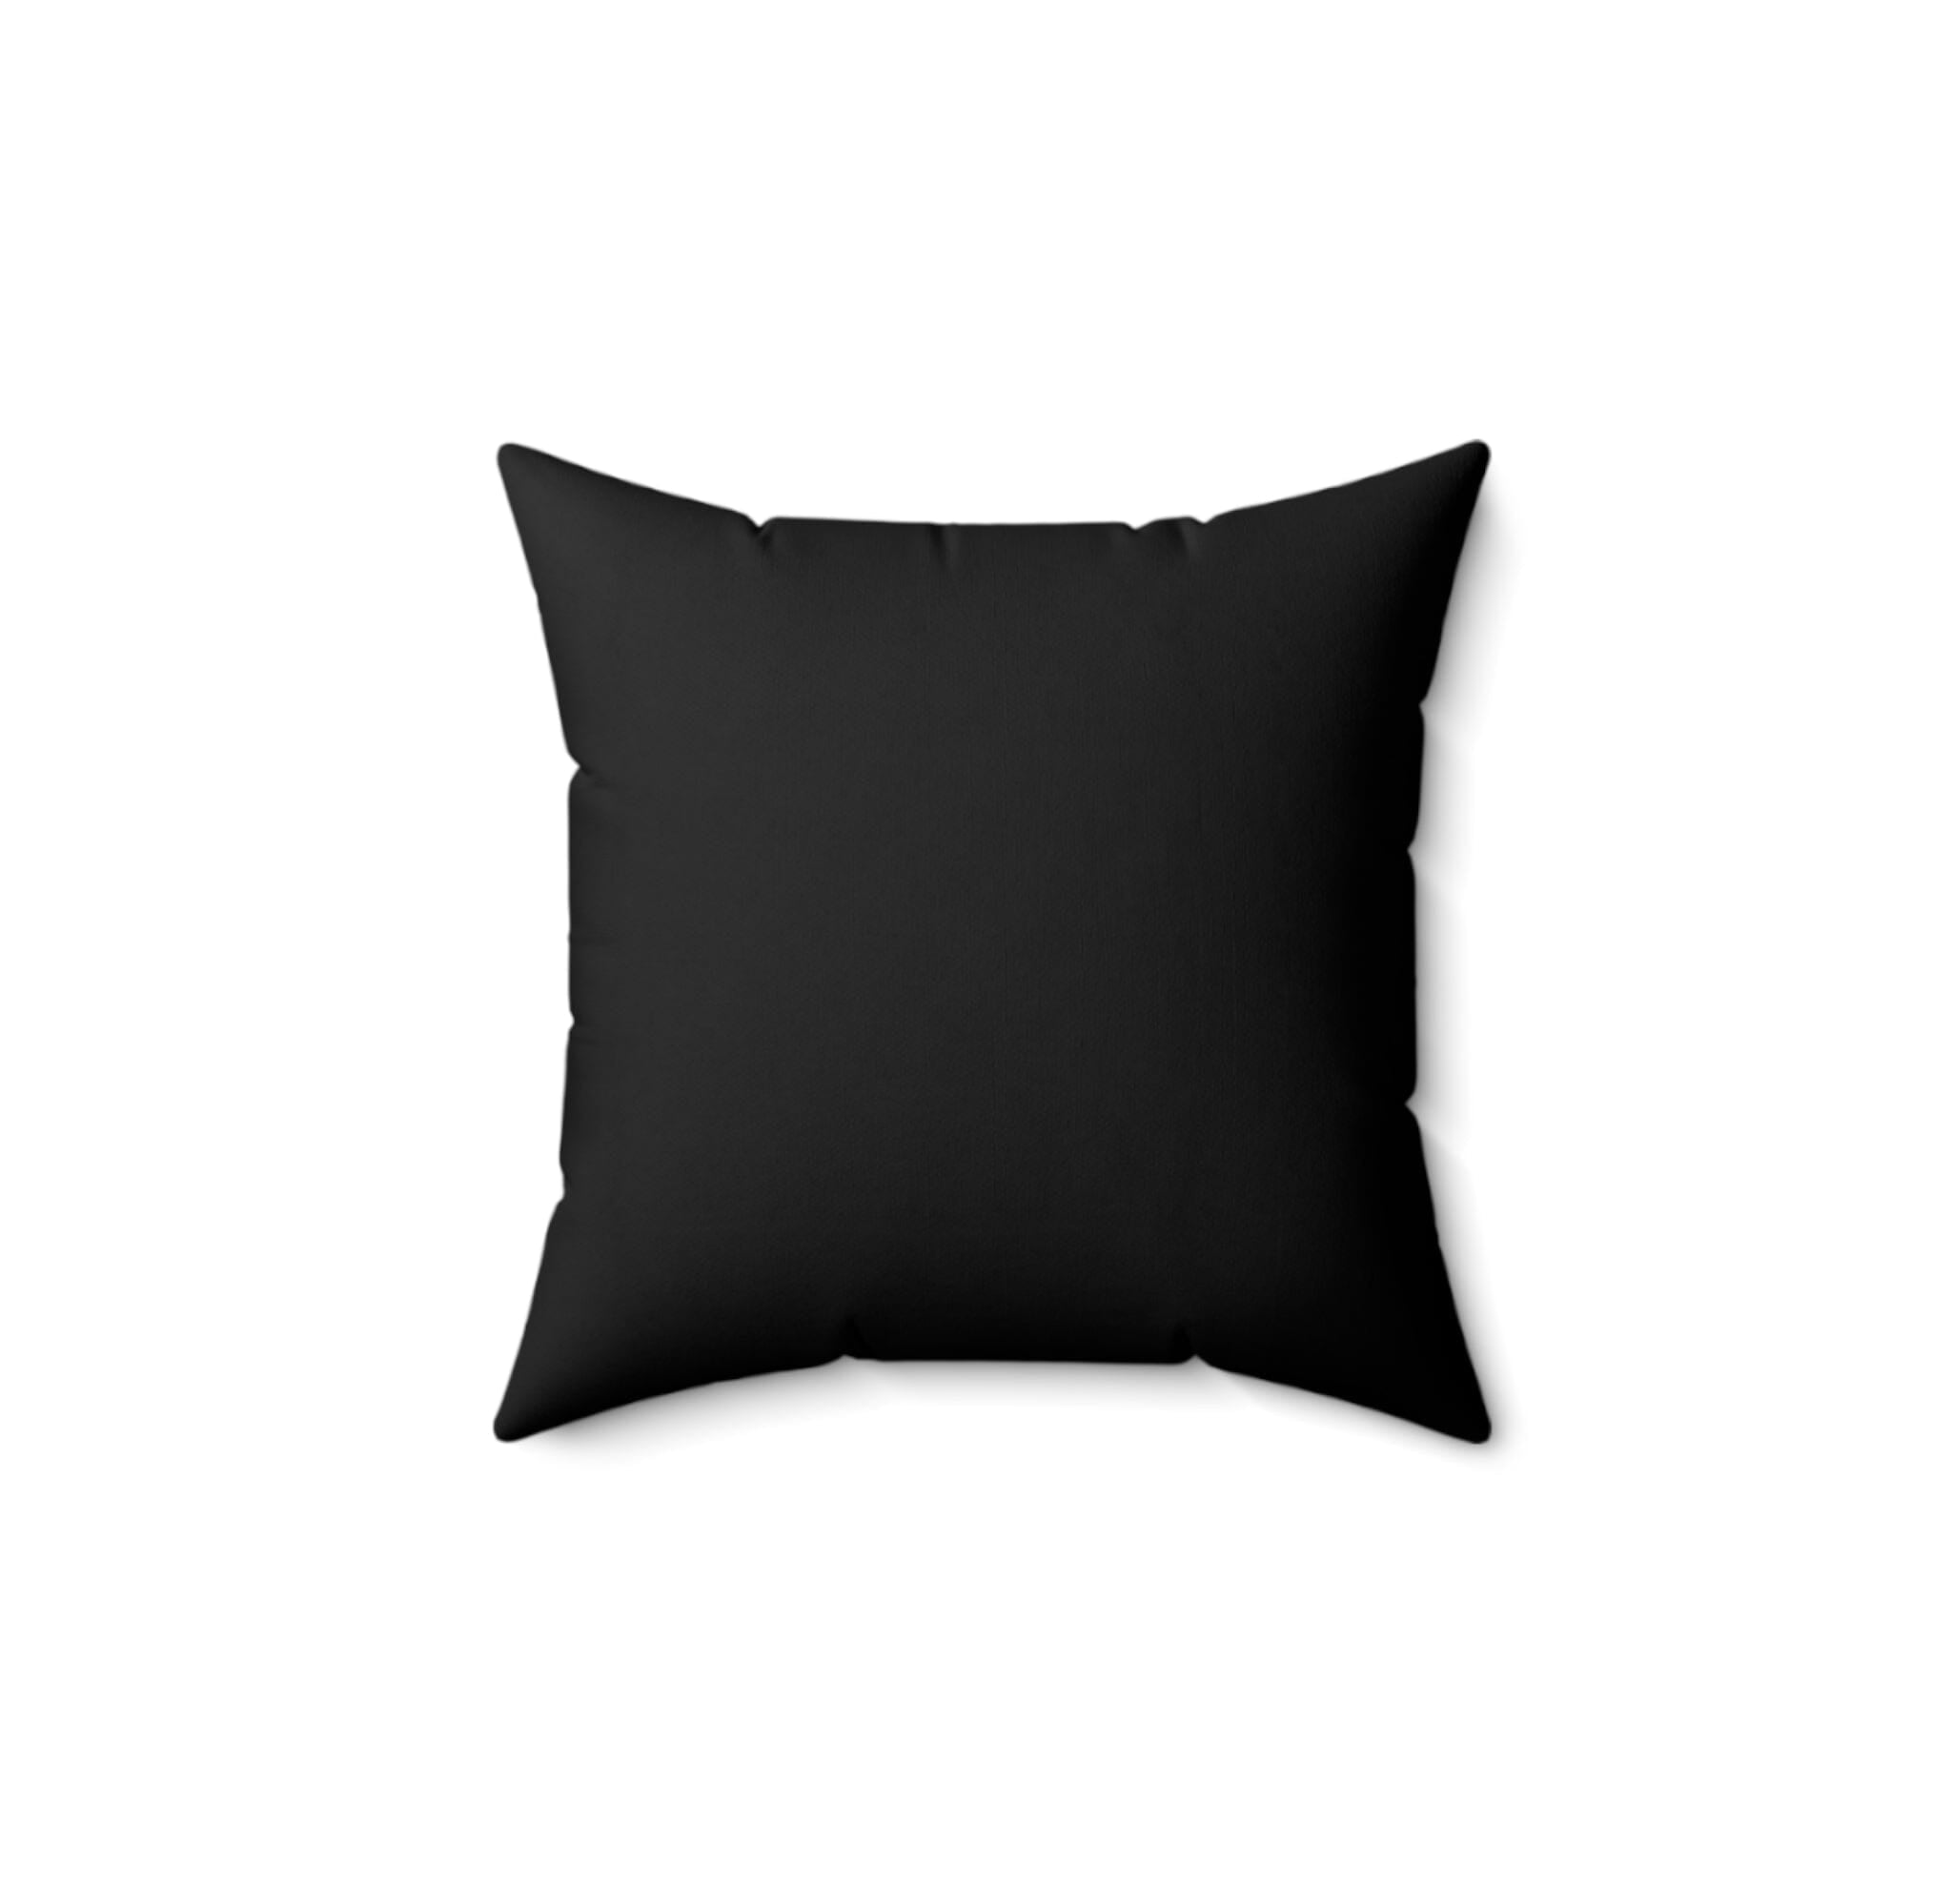 Autistic AF Pillow Home Decor The Autistic Innovator 